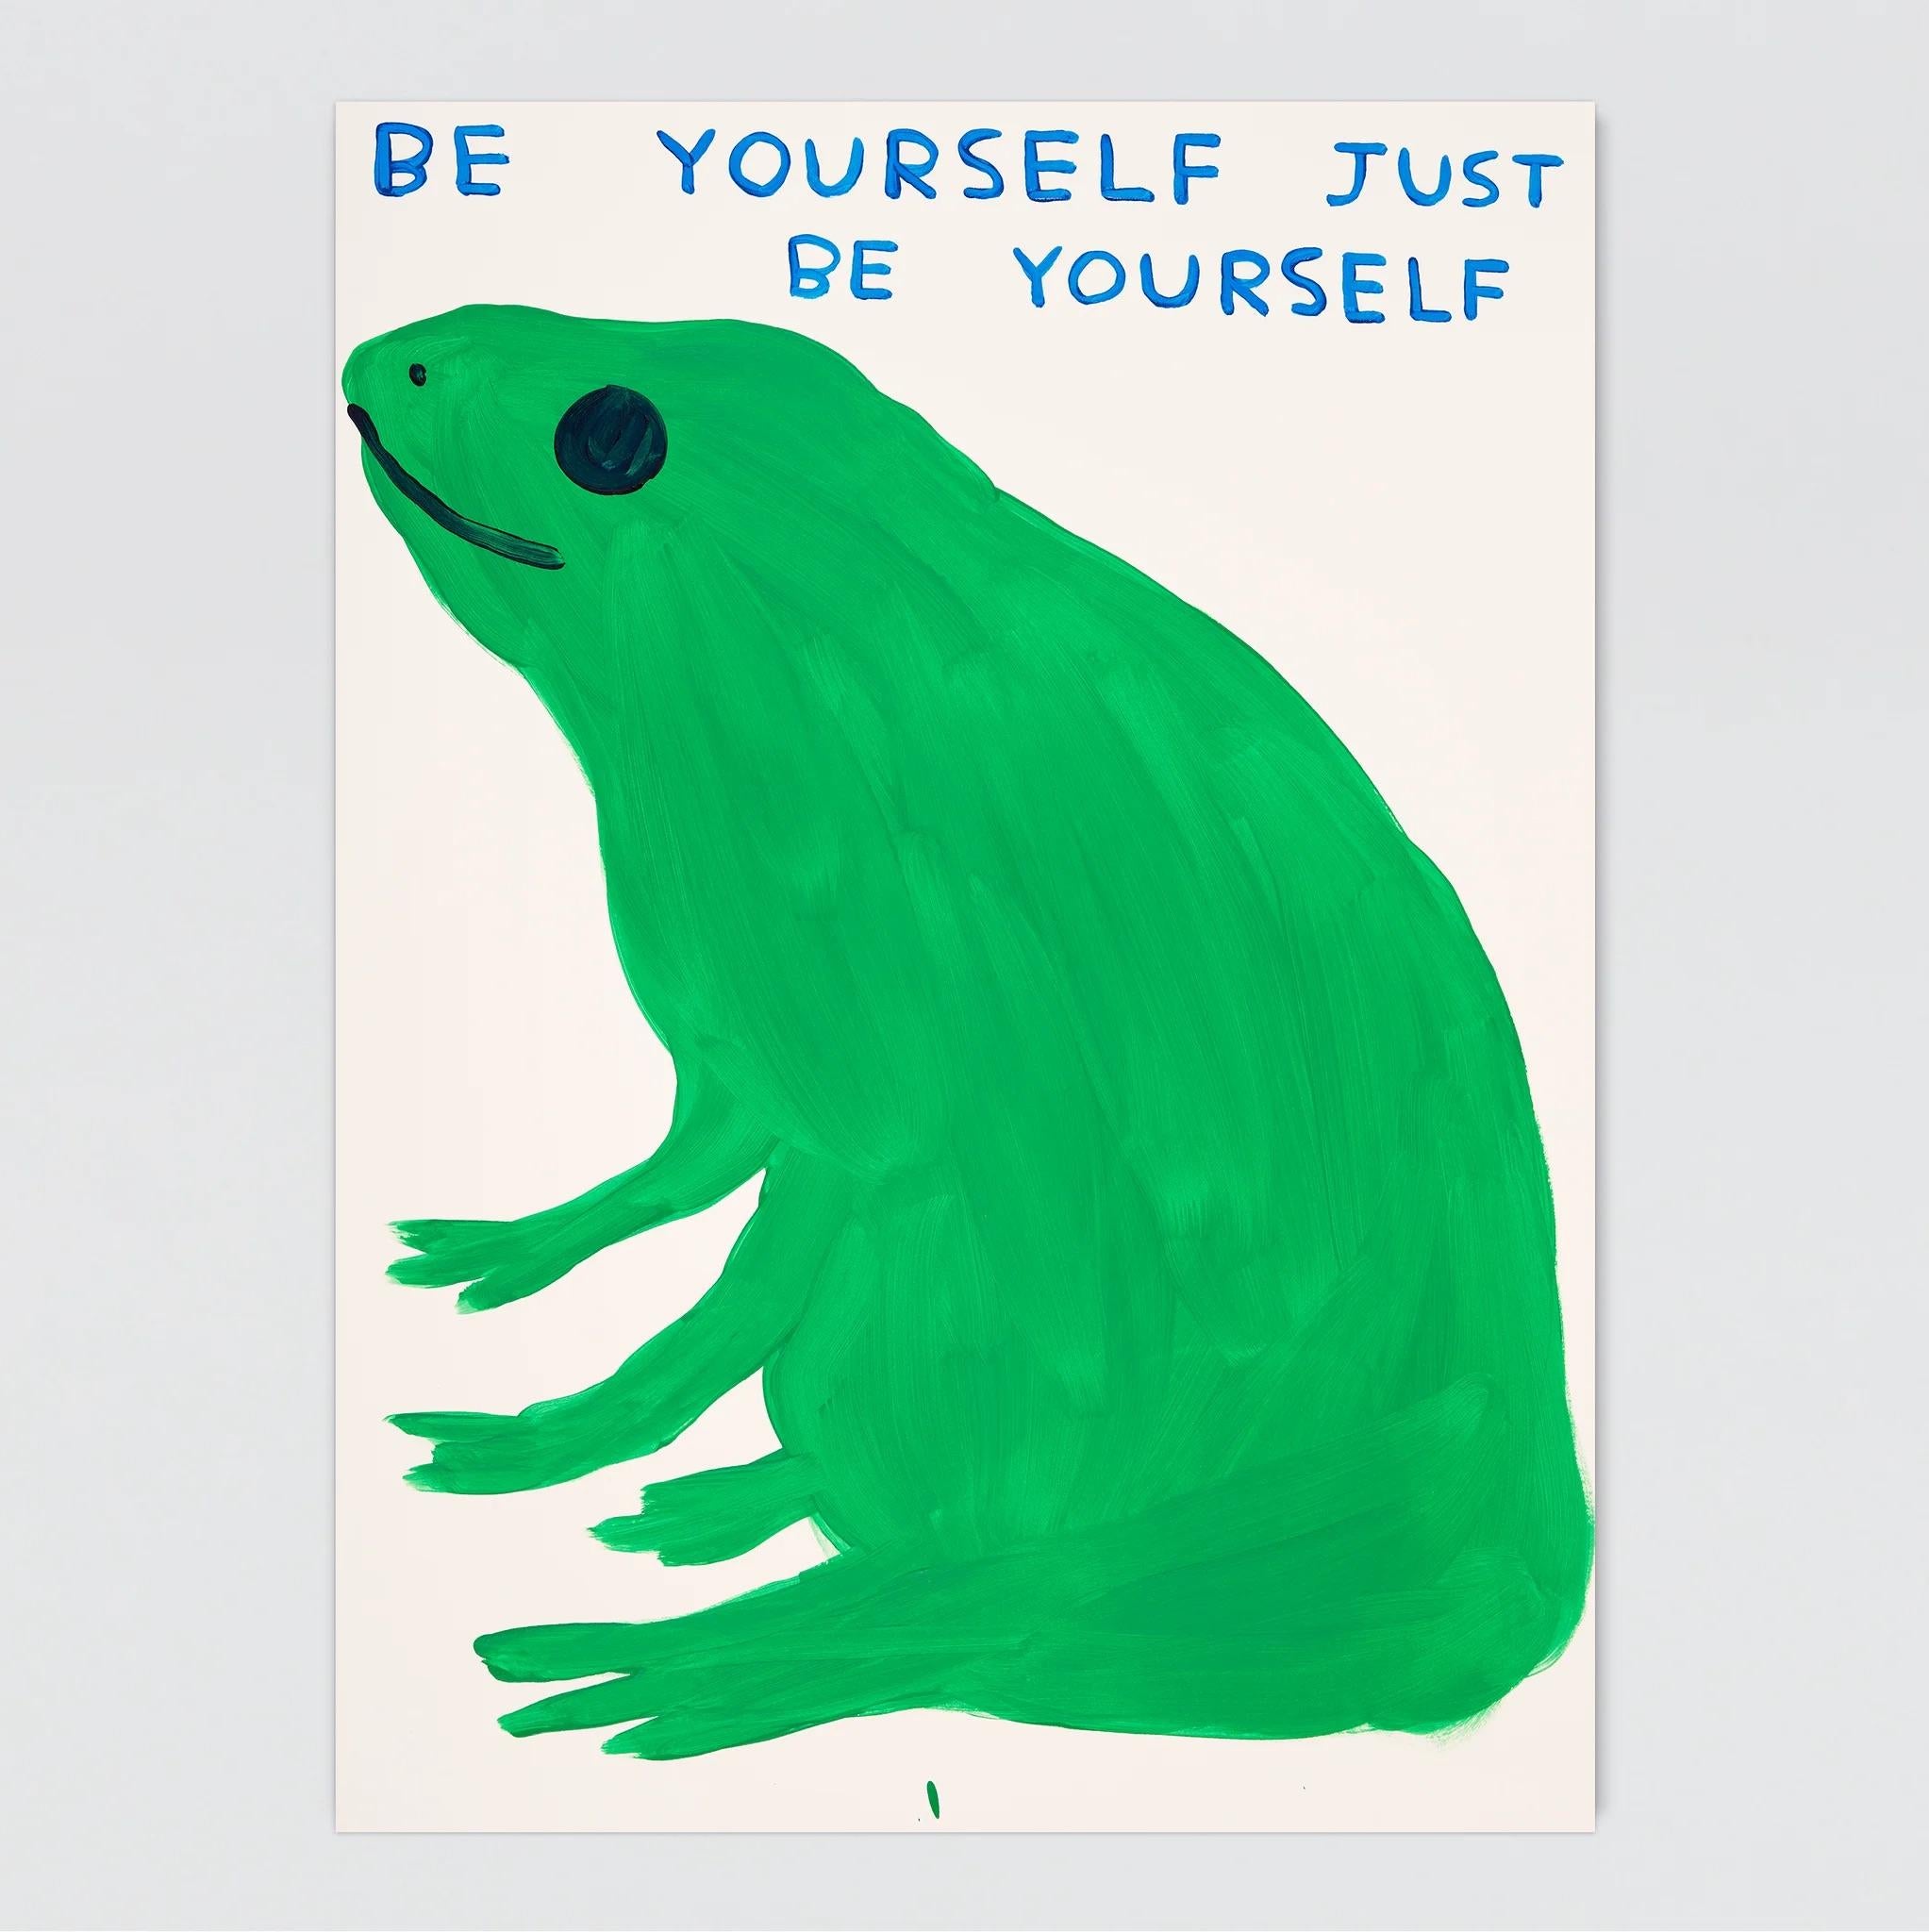 David Shrigley
Be yourself just be yourself, 2023
12 colour screenprint with a two varnish overlay printed on Somerset Satin Tub sized 410 gsm in a custom delivery box adorned with a Shrigley drawing
29 1/2 × 22 in  75 × 56 cm
Edition of 125